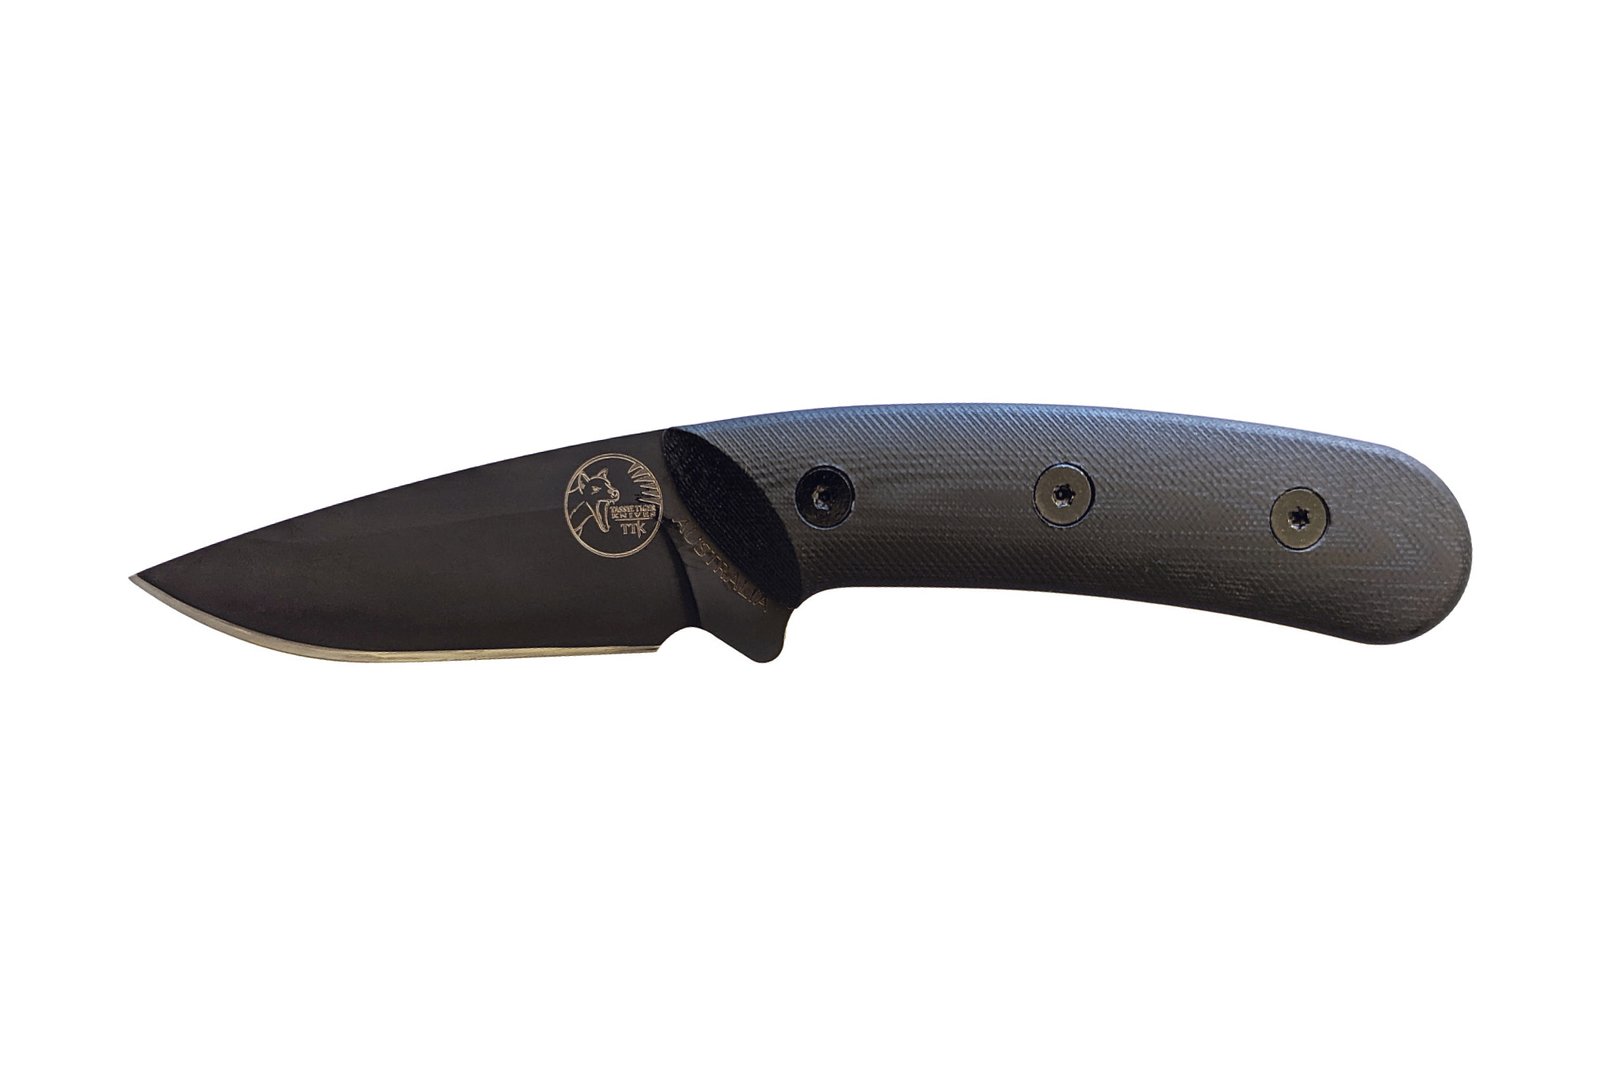 ESEE 5P-KO-E Fixed Blade Knife Black 1095 Carbon Steel & Natural